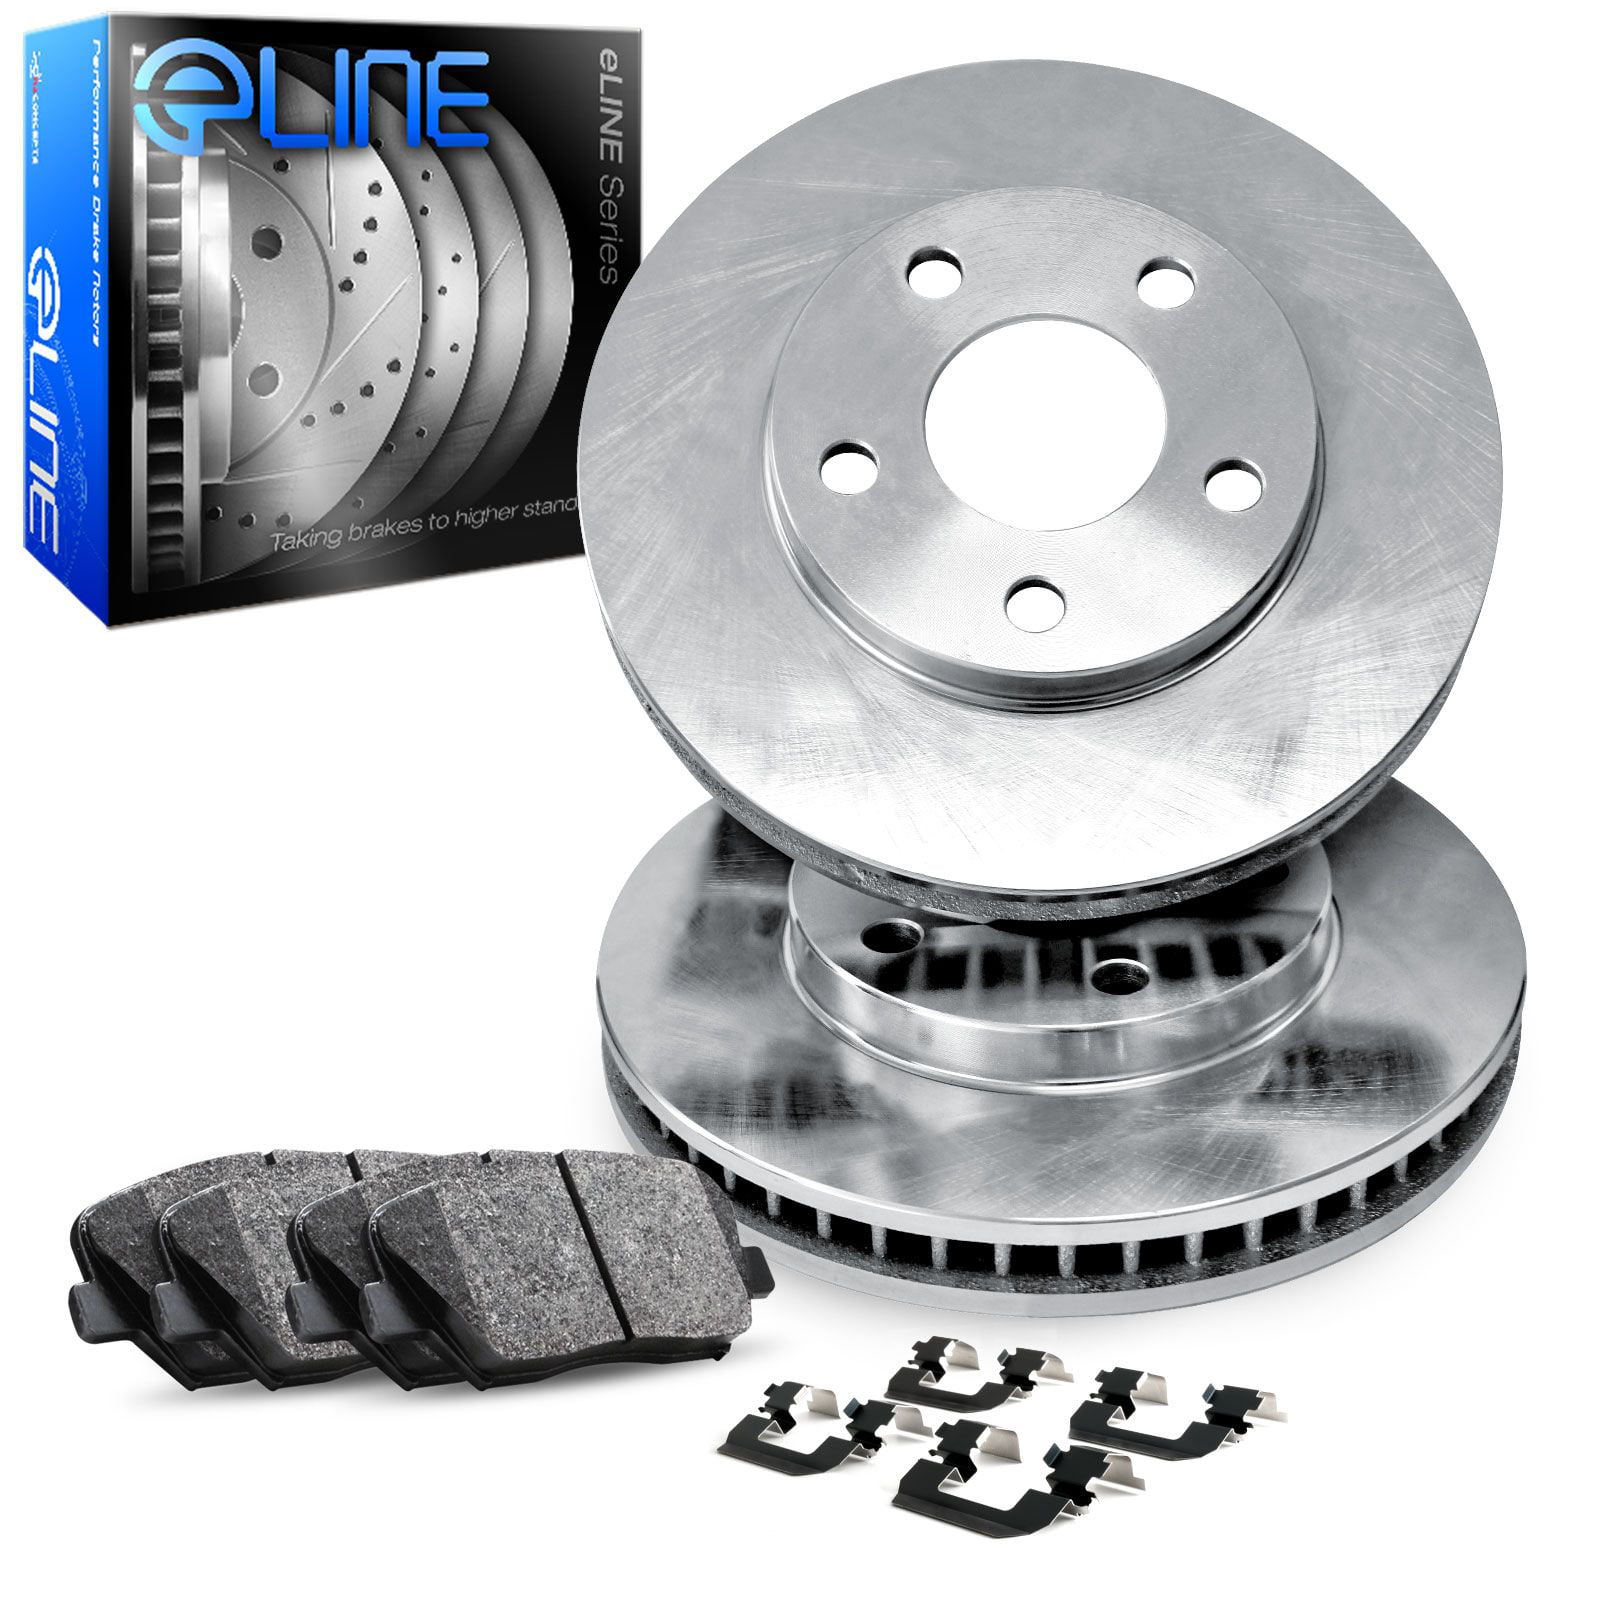 Brake Pads Include Hardware With Two Years Manufacturer Warranty Front Disc Brake Rotors and Ceramic Brake Pads for 2011 Land Rover LR4